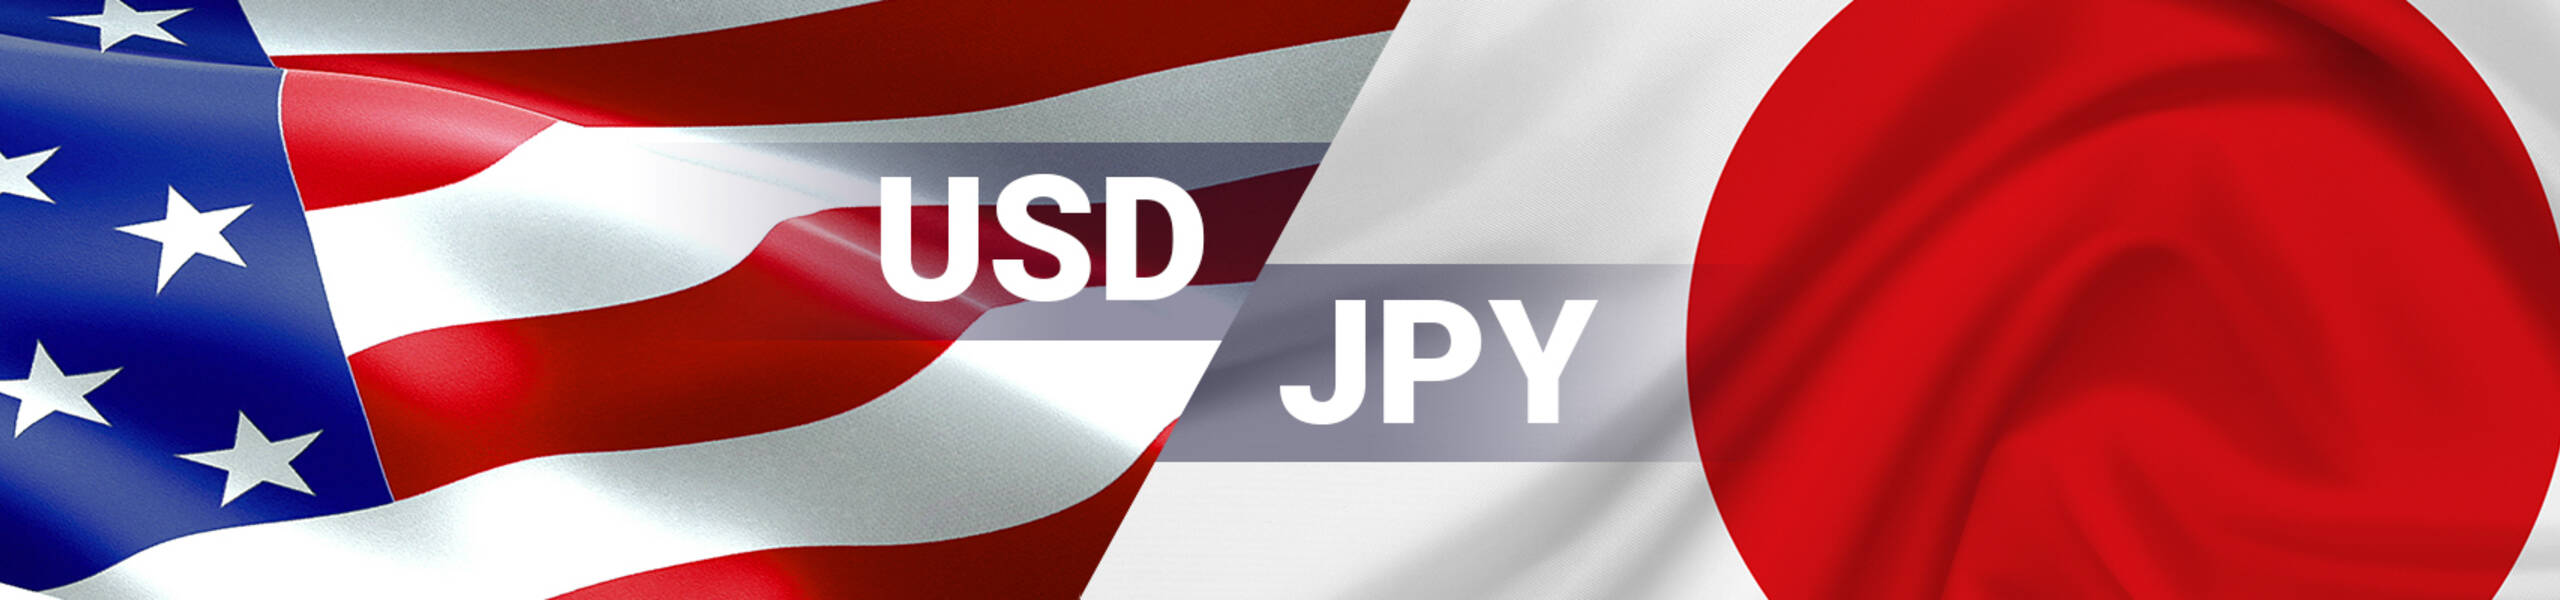 USD/JPY Dailyレポート 2017/11/21